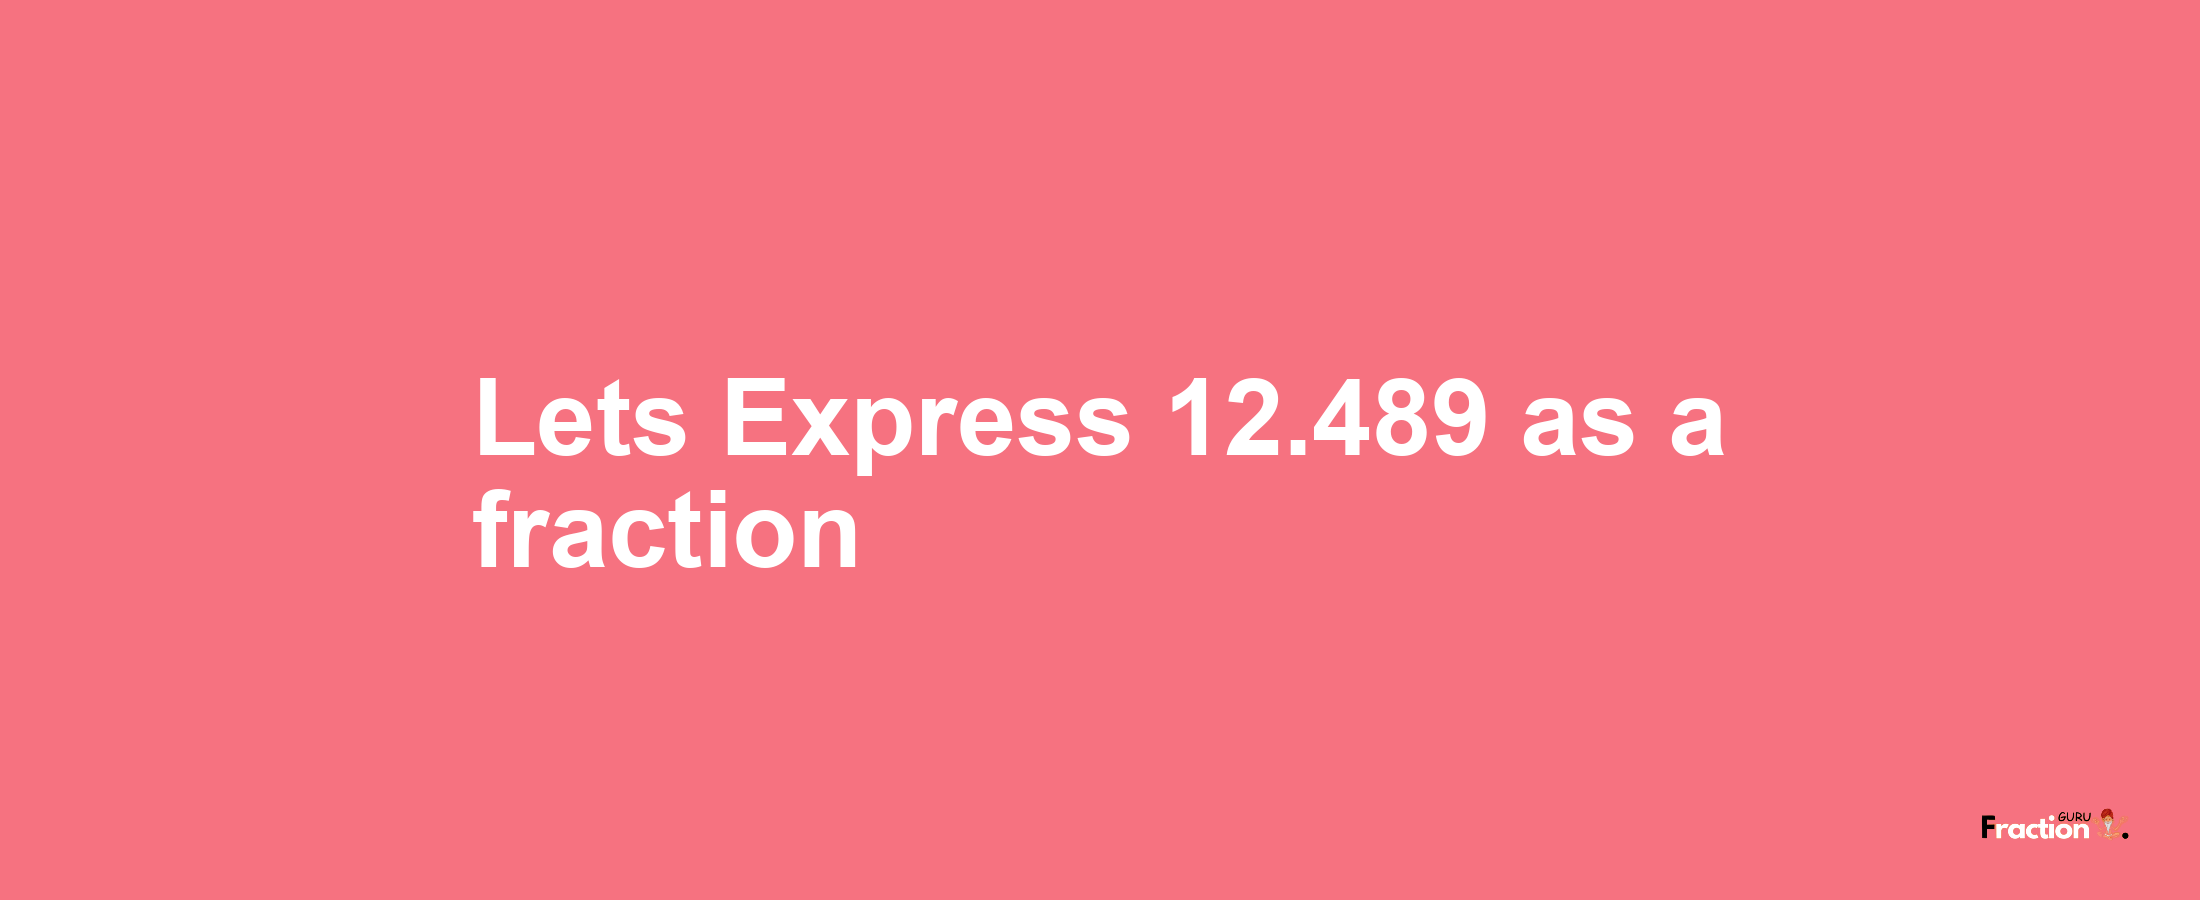 Lets Express 12.489 as afraction